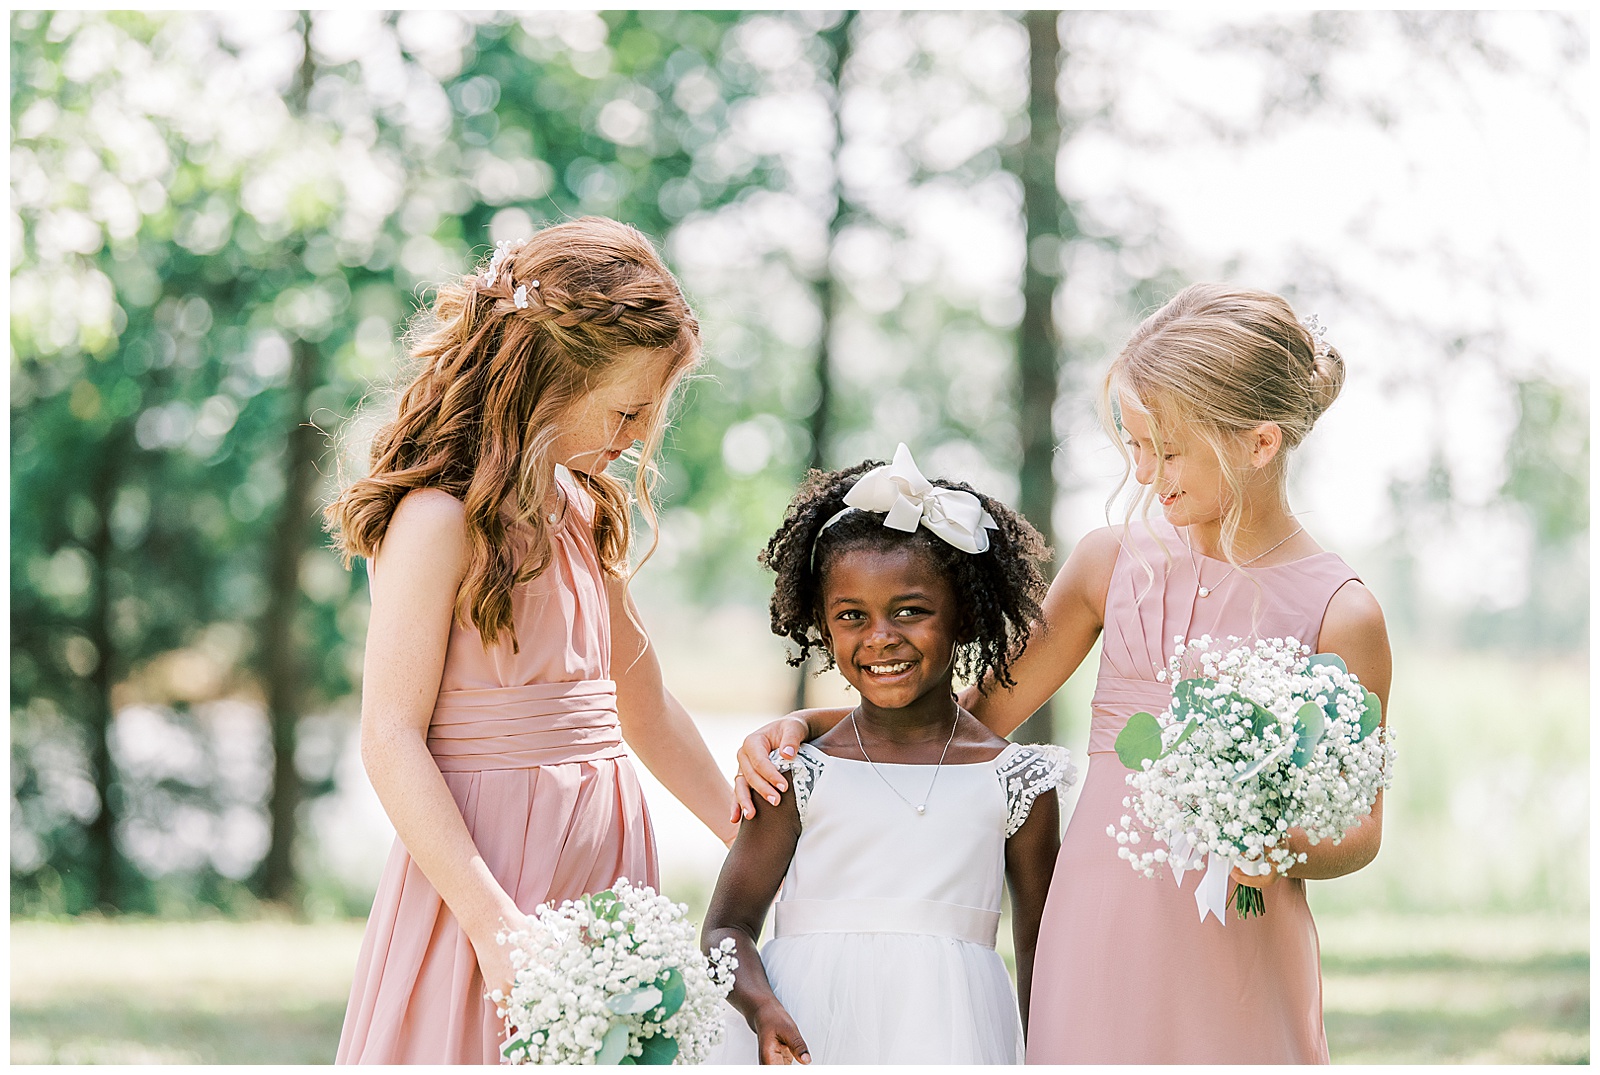 adorable outdoor flower girl portraits in pink and white dresses